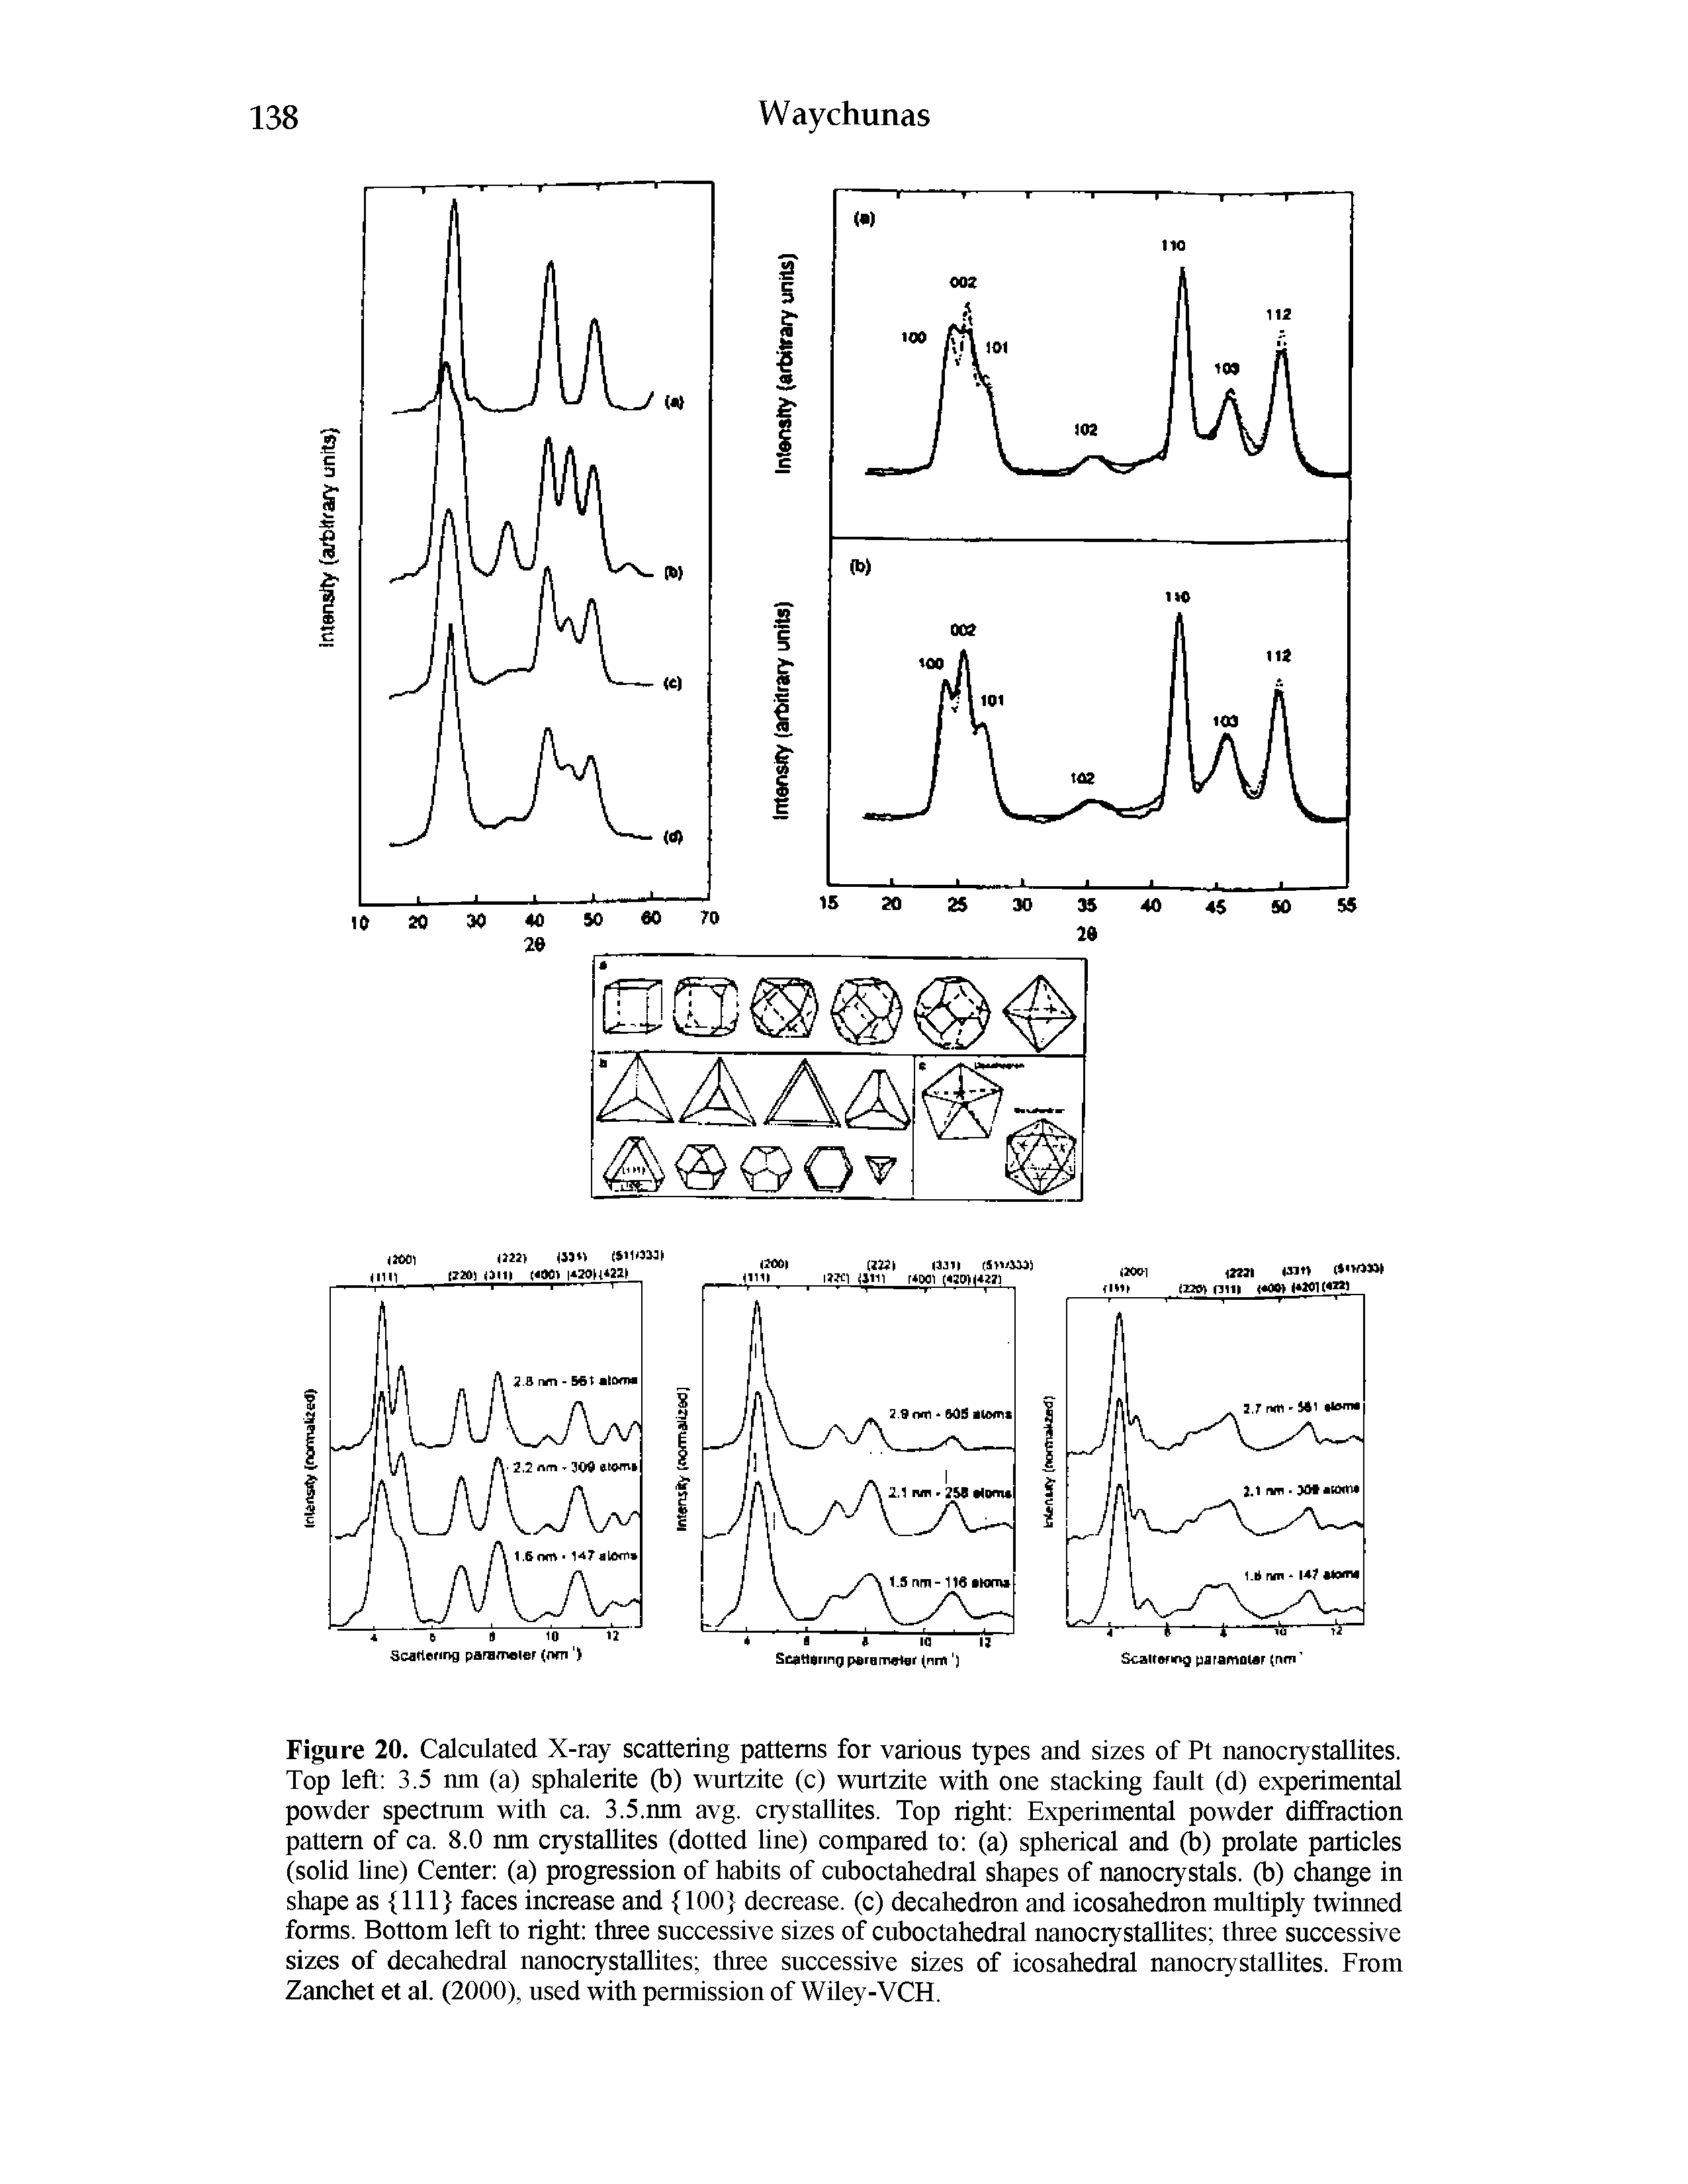 Figure 20. Calculated X-ray scattering patterns for various types and sizes of Pt nanocrystallites. Top left 3.5 nm (a) sphalerite (b) wurtzite (c) wurtzite with one stacking fault (d) experimental powder spectmm with ca. 3.5.nm avg. crystallites. Top right Experimental powder diffraction pattern of ca. 8.0 nm crystallites (dotted line) compared to (a) spherical and (b) prolate particles (solid line) Center (a) progression of habits of cuboctahedral shapes of nanocrystals, (b) change in shape as 111 faces increase and 100 decrease, (c) decahedron and icosahedron multiply twiimed forms. Bottom left to right three successive sizes of cuboctahedral nanociystallites three successive sizes of decahedral nanociystallites three successive sizes of icosahedral nanocrystallites. From Zanchet et al. (2000), used with permission of Wiley-VCH.